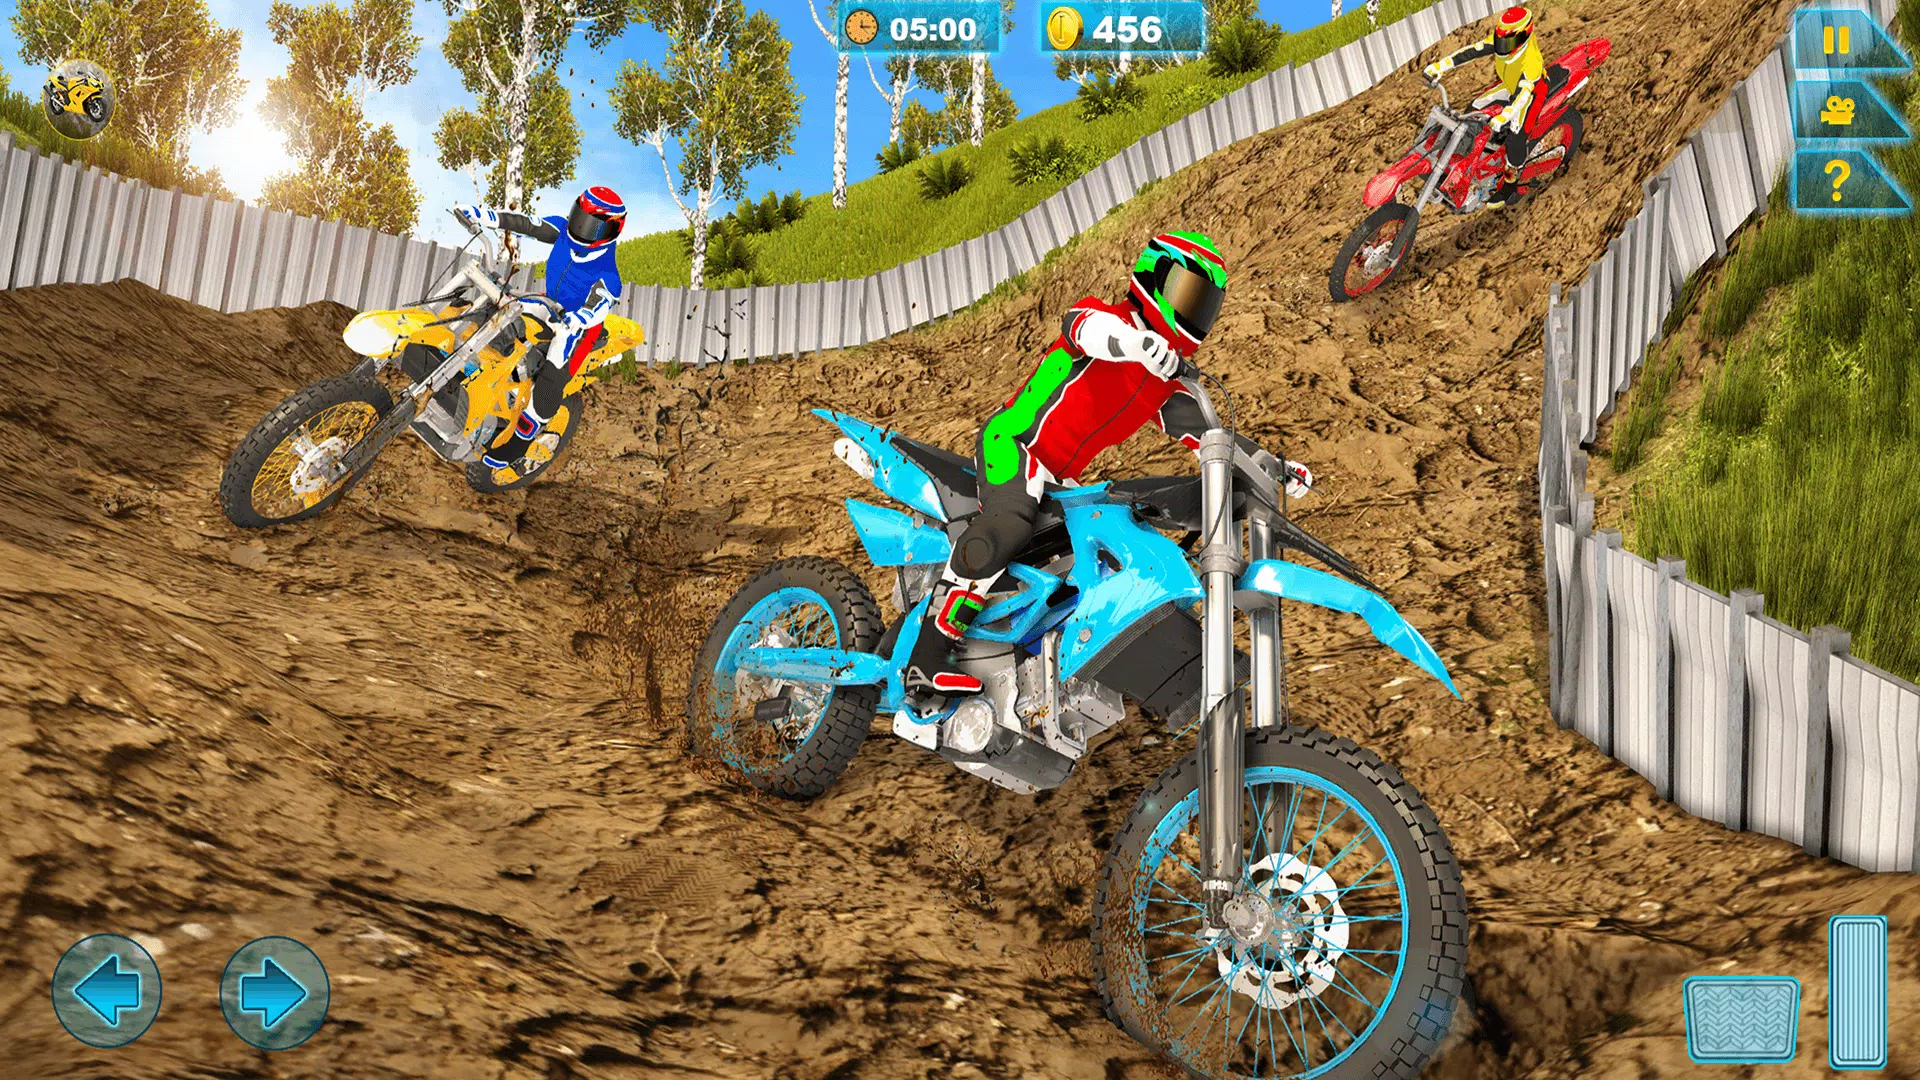 Doodle Moto APK for Android Download